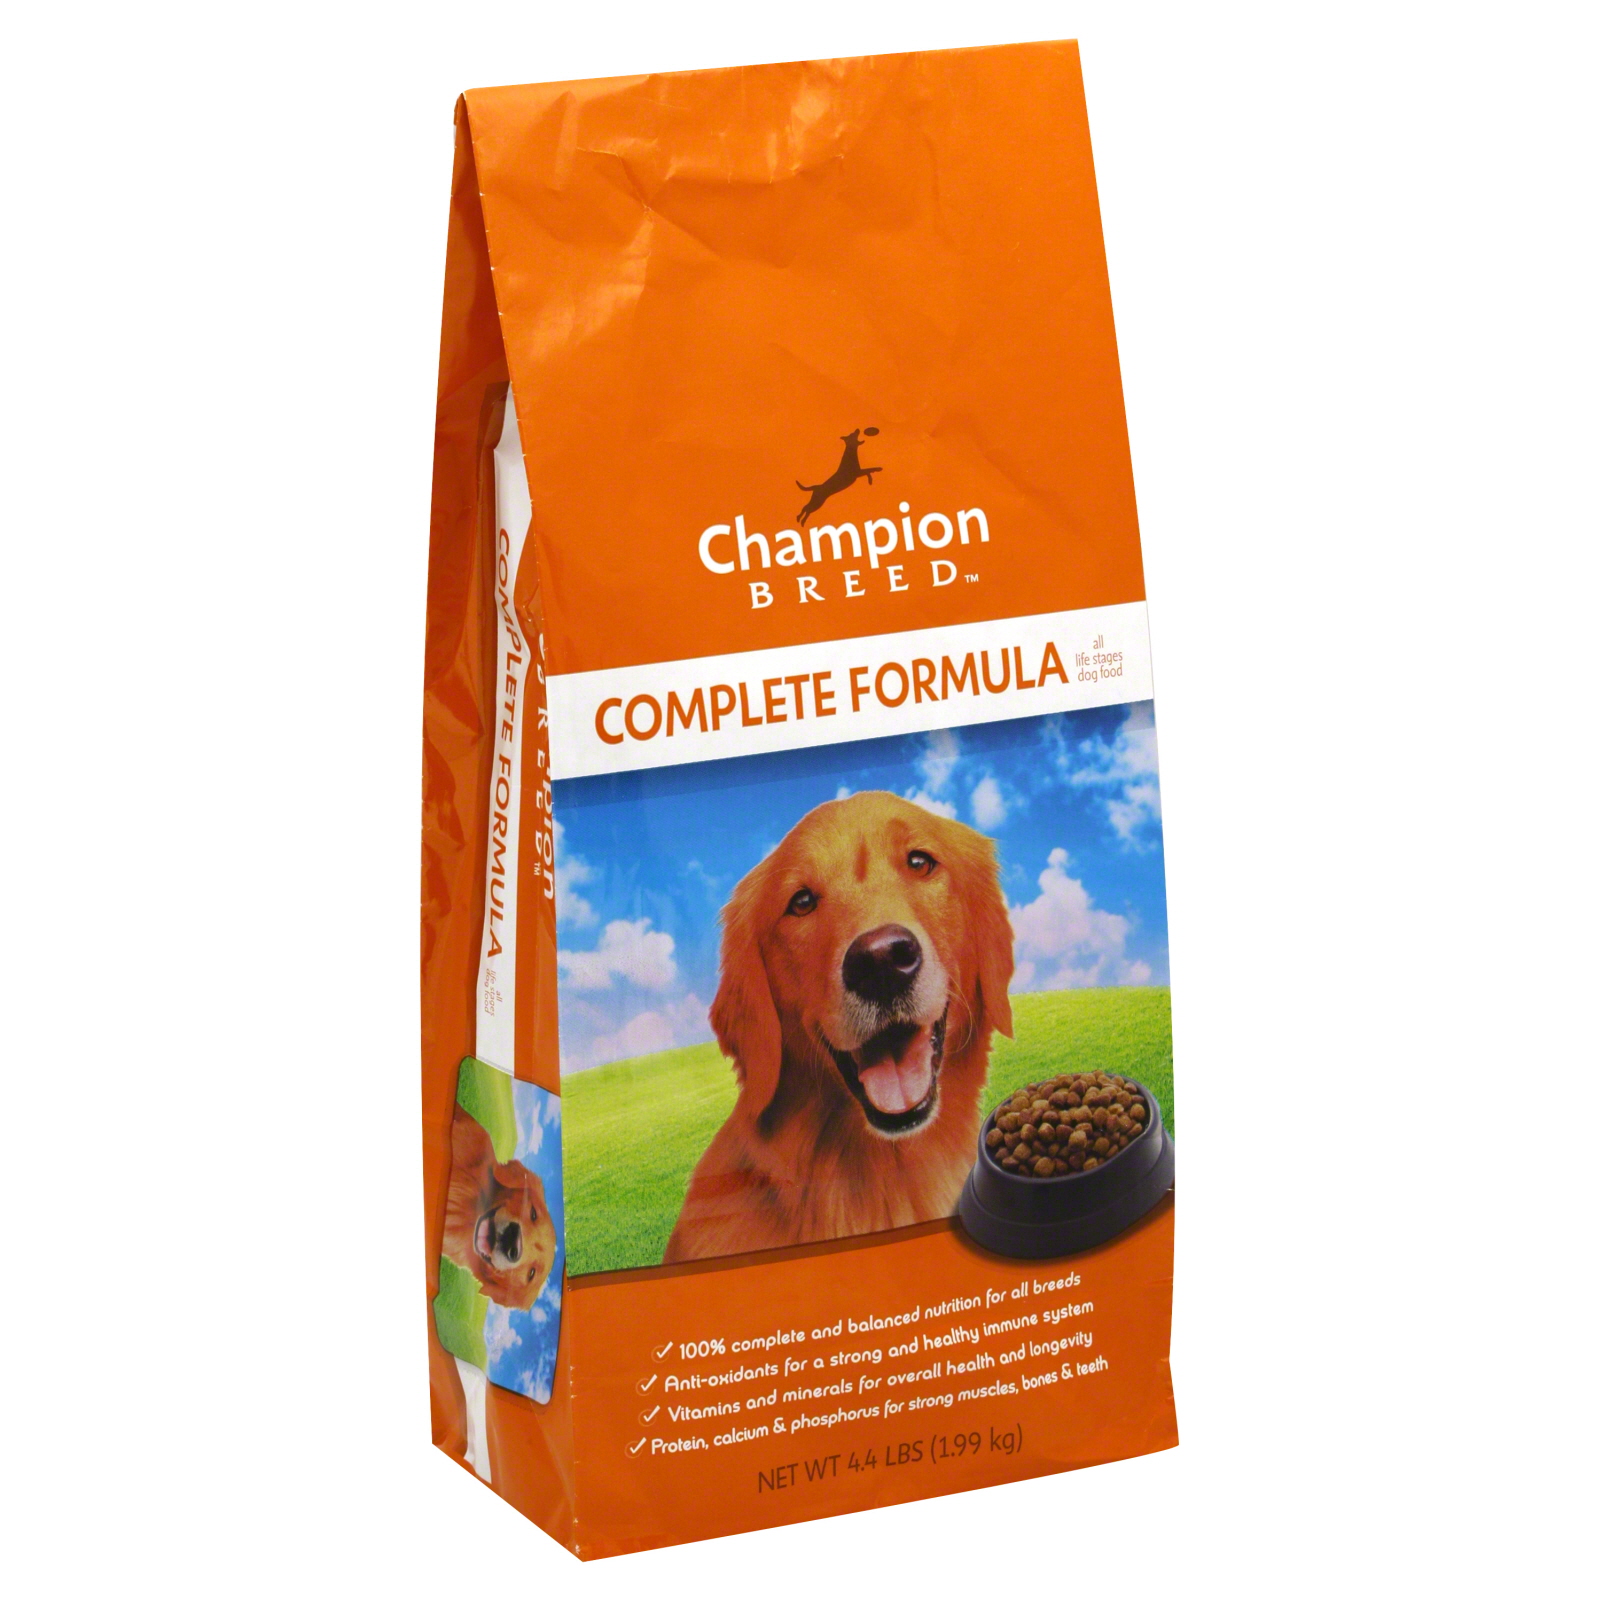 Champion Breed Dog Food, All Life Stages, Complete Formula, 4.4 lb (1.99 kg) Pet Supplies